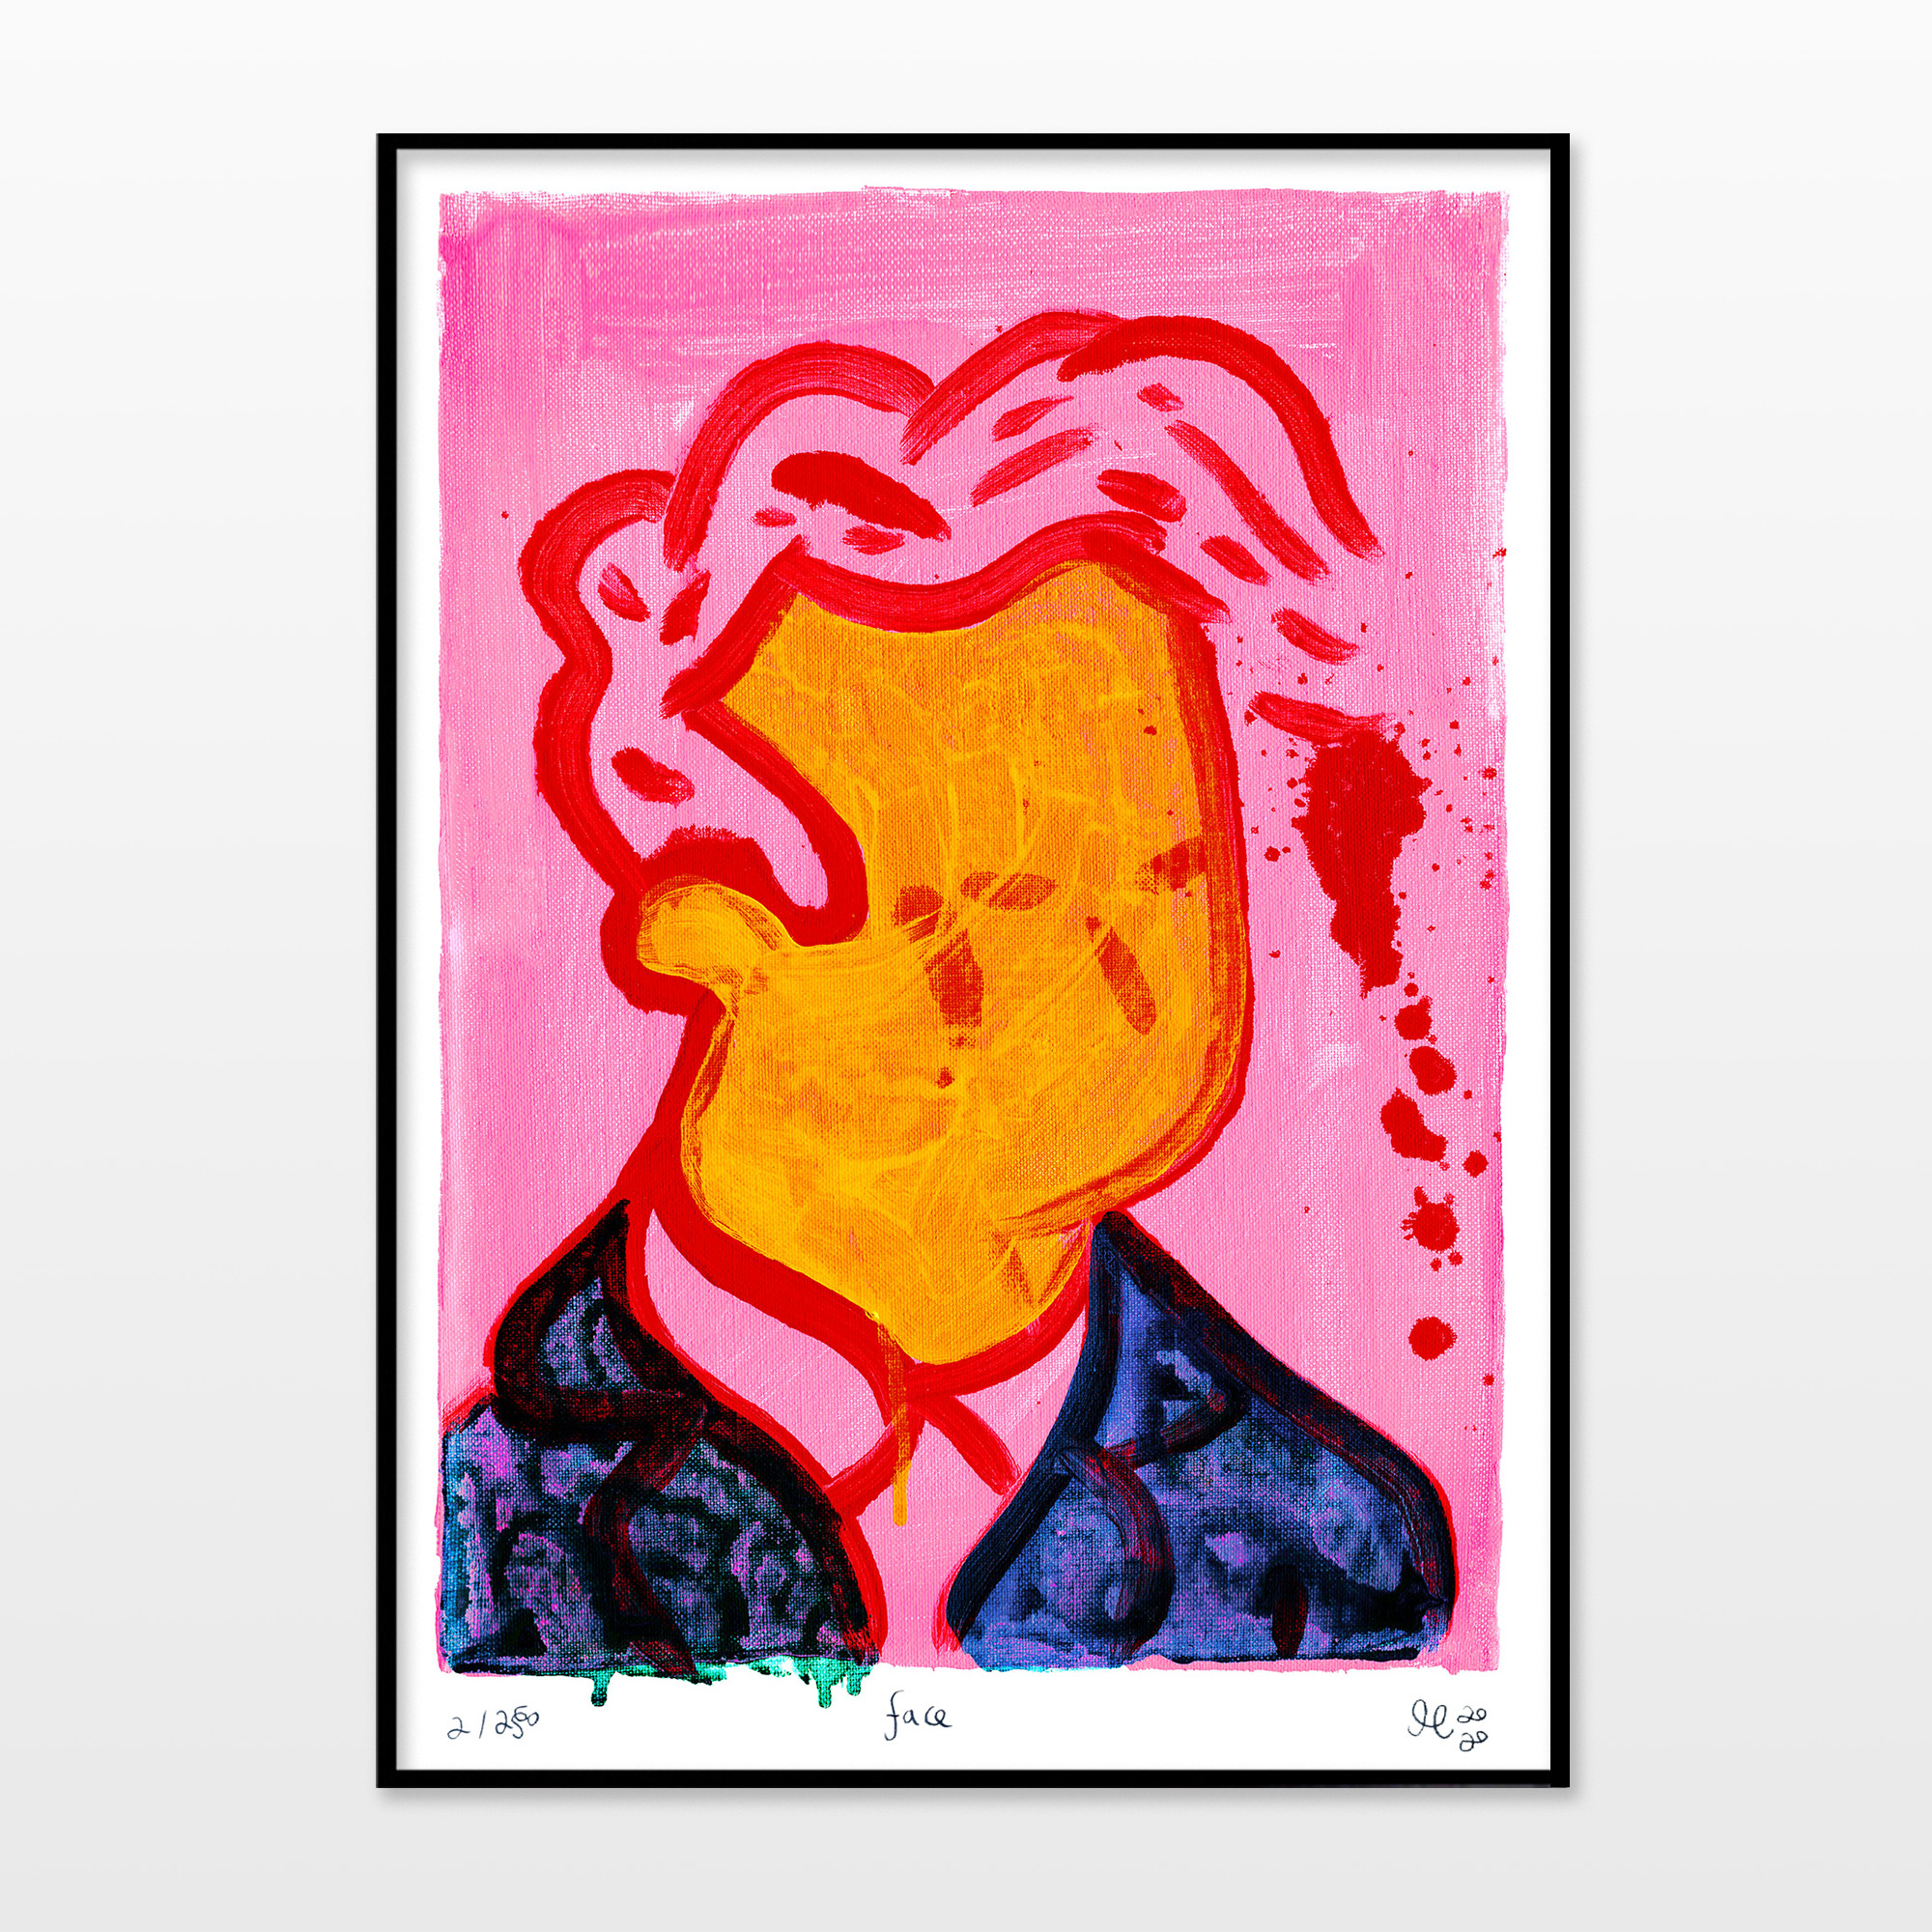 posters-prints, giclee-print, colorful, figurative, illustrative, pop, people, blue, pink, yellow, ink, paper, contemporary-art, danish, decorative, design, faces, interior, interior-design, modern, modern-art, nordic, posters, prints, scandinavien, Buy original high quality art. Paintings, drawings, limited edition prints & posters by talented artists.